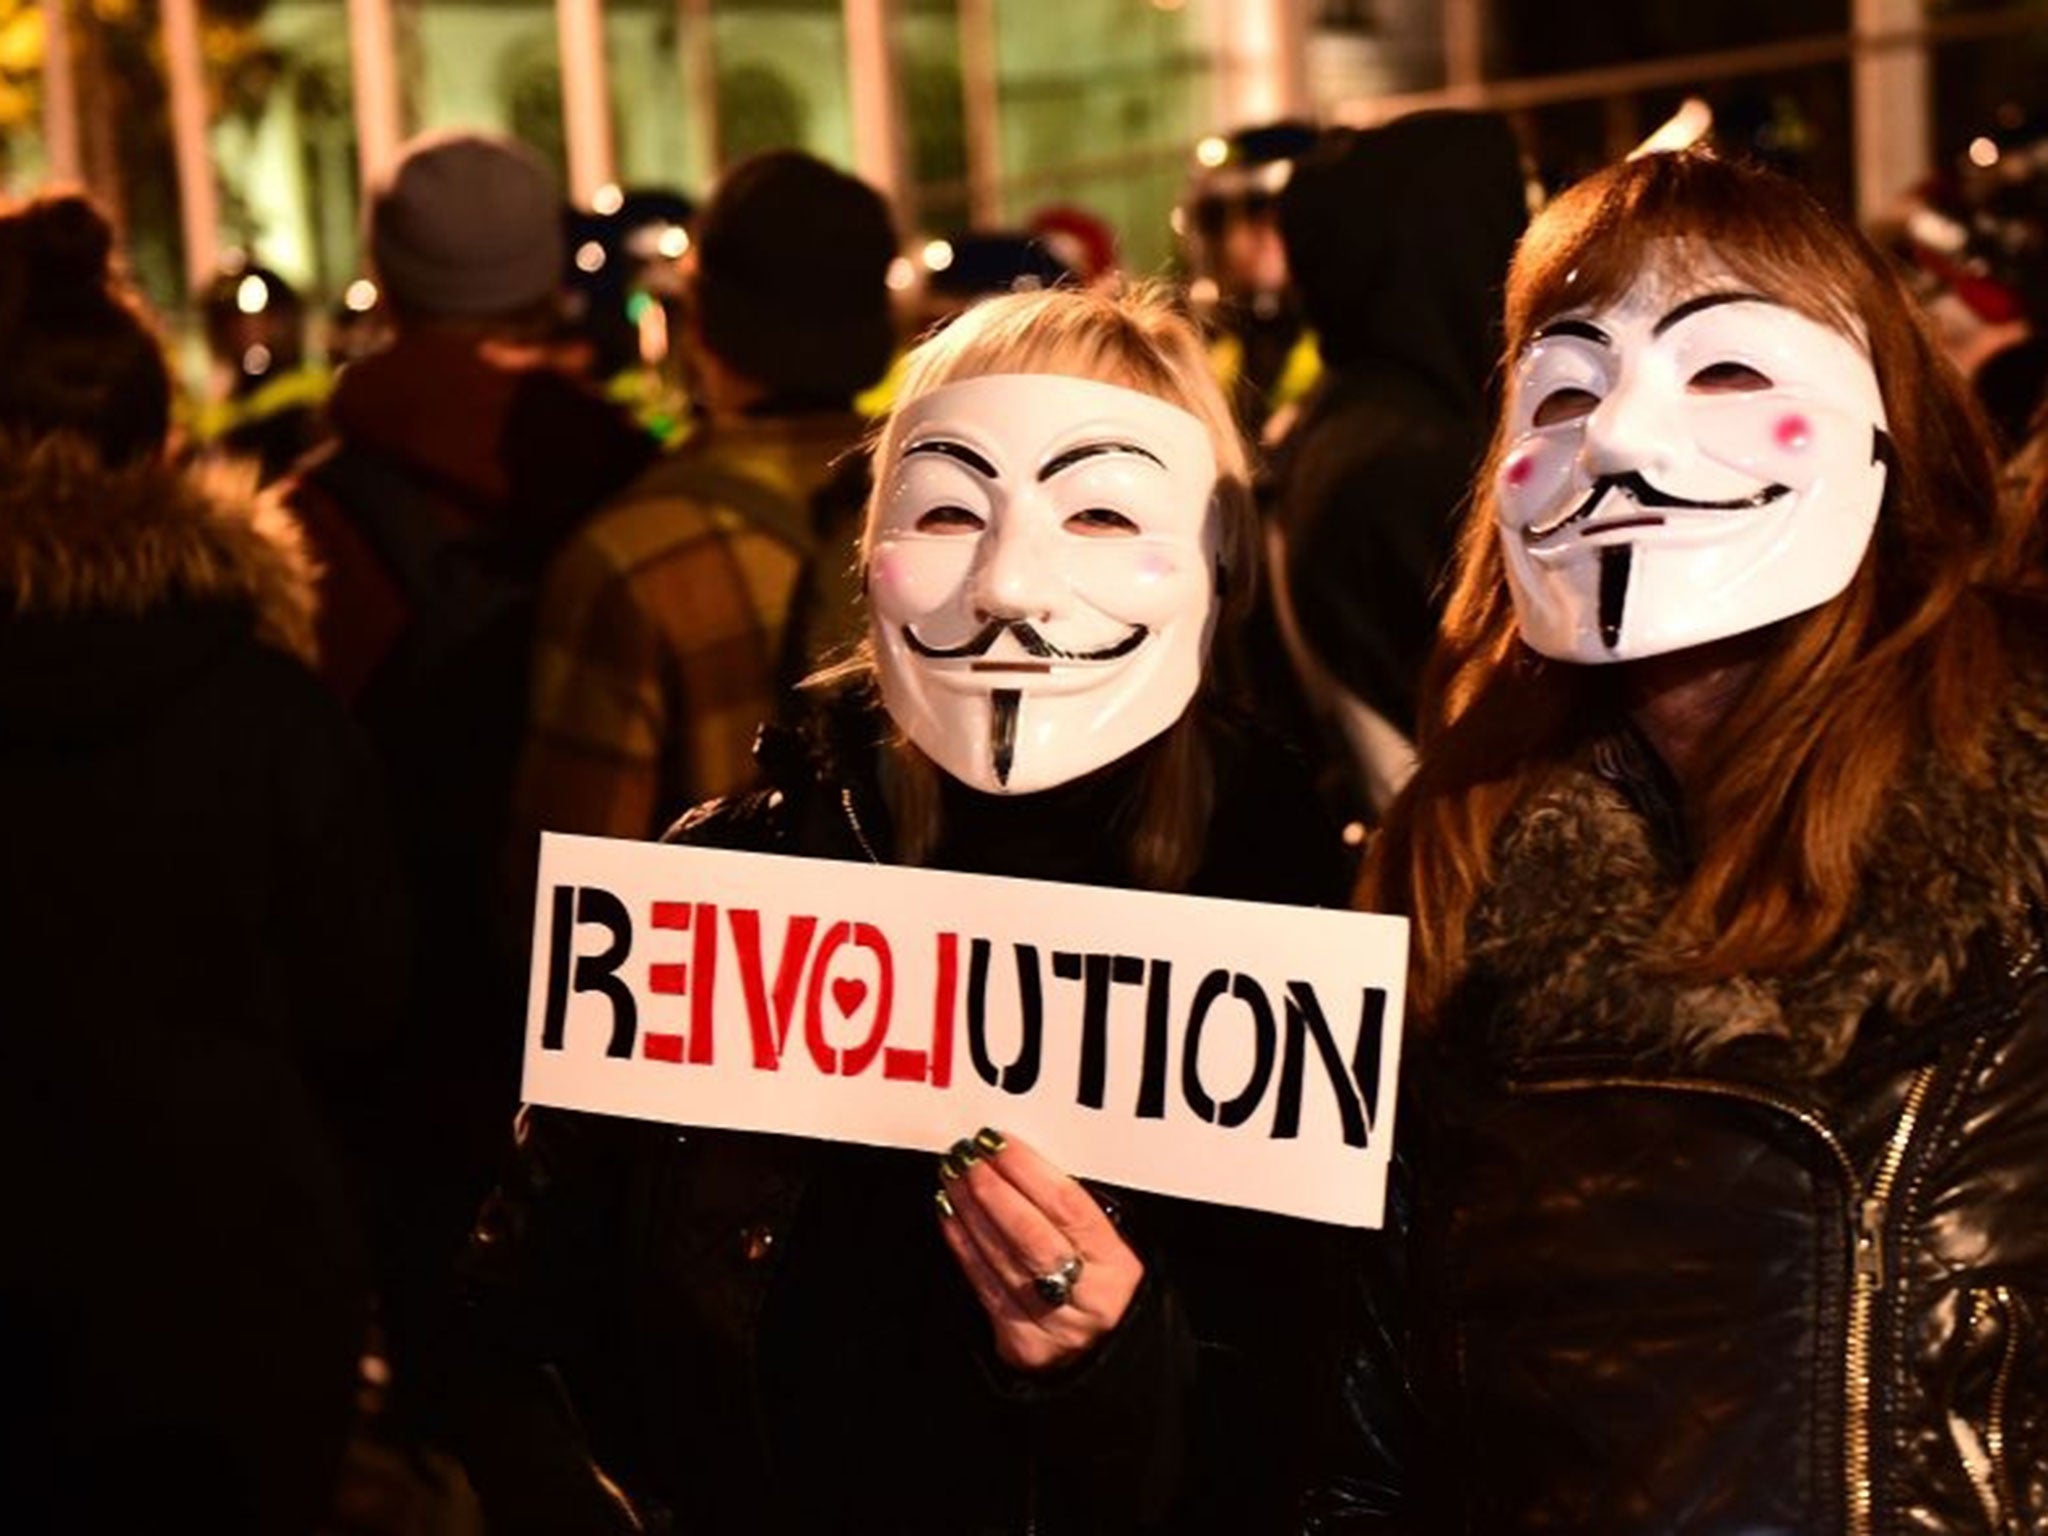 Anonymous is now turning its focus to unearthing international paedophile networks